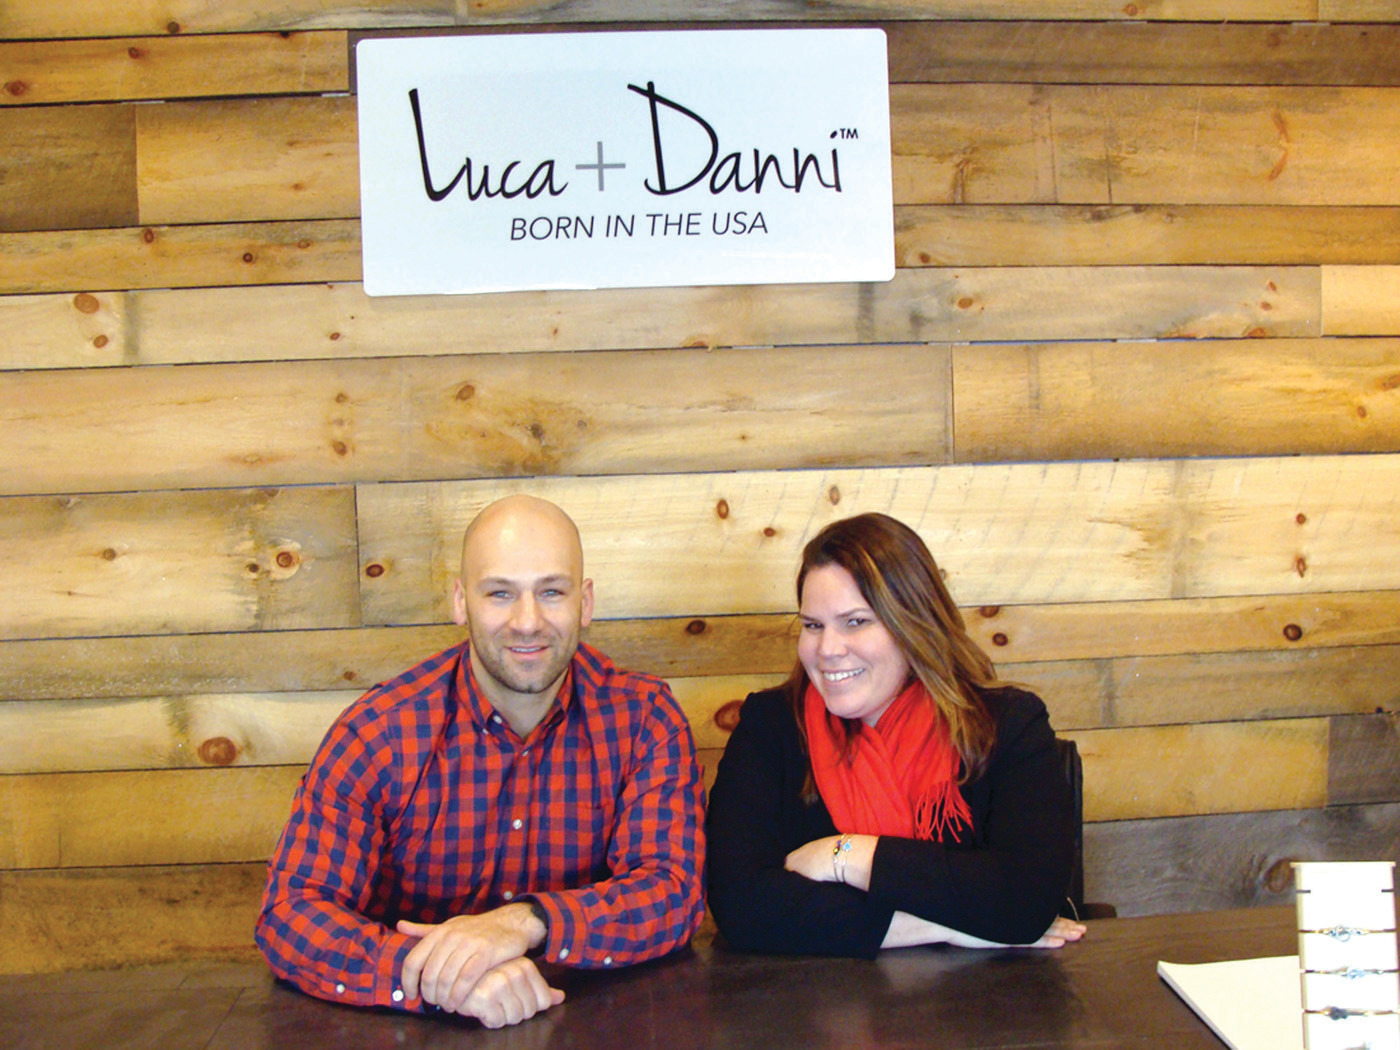 HOME IS WHERE THE HEART IS: Luca and Danni, the Cranston jewelry company Fred Magnanimi founded in his late brother’s name, has their “Tree of Life” bracelet featured in the Dana-Farber Cancer Institute’s Holiday Collection this year.